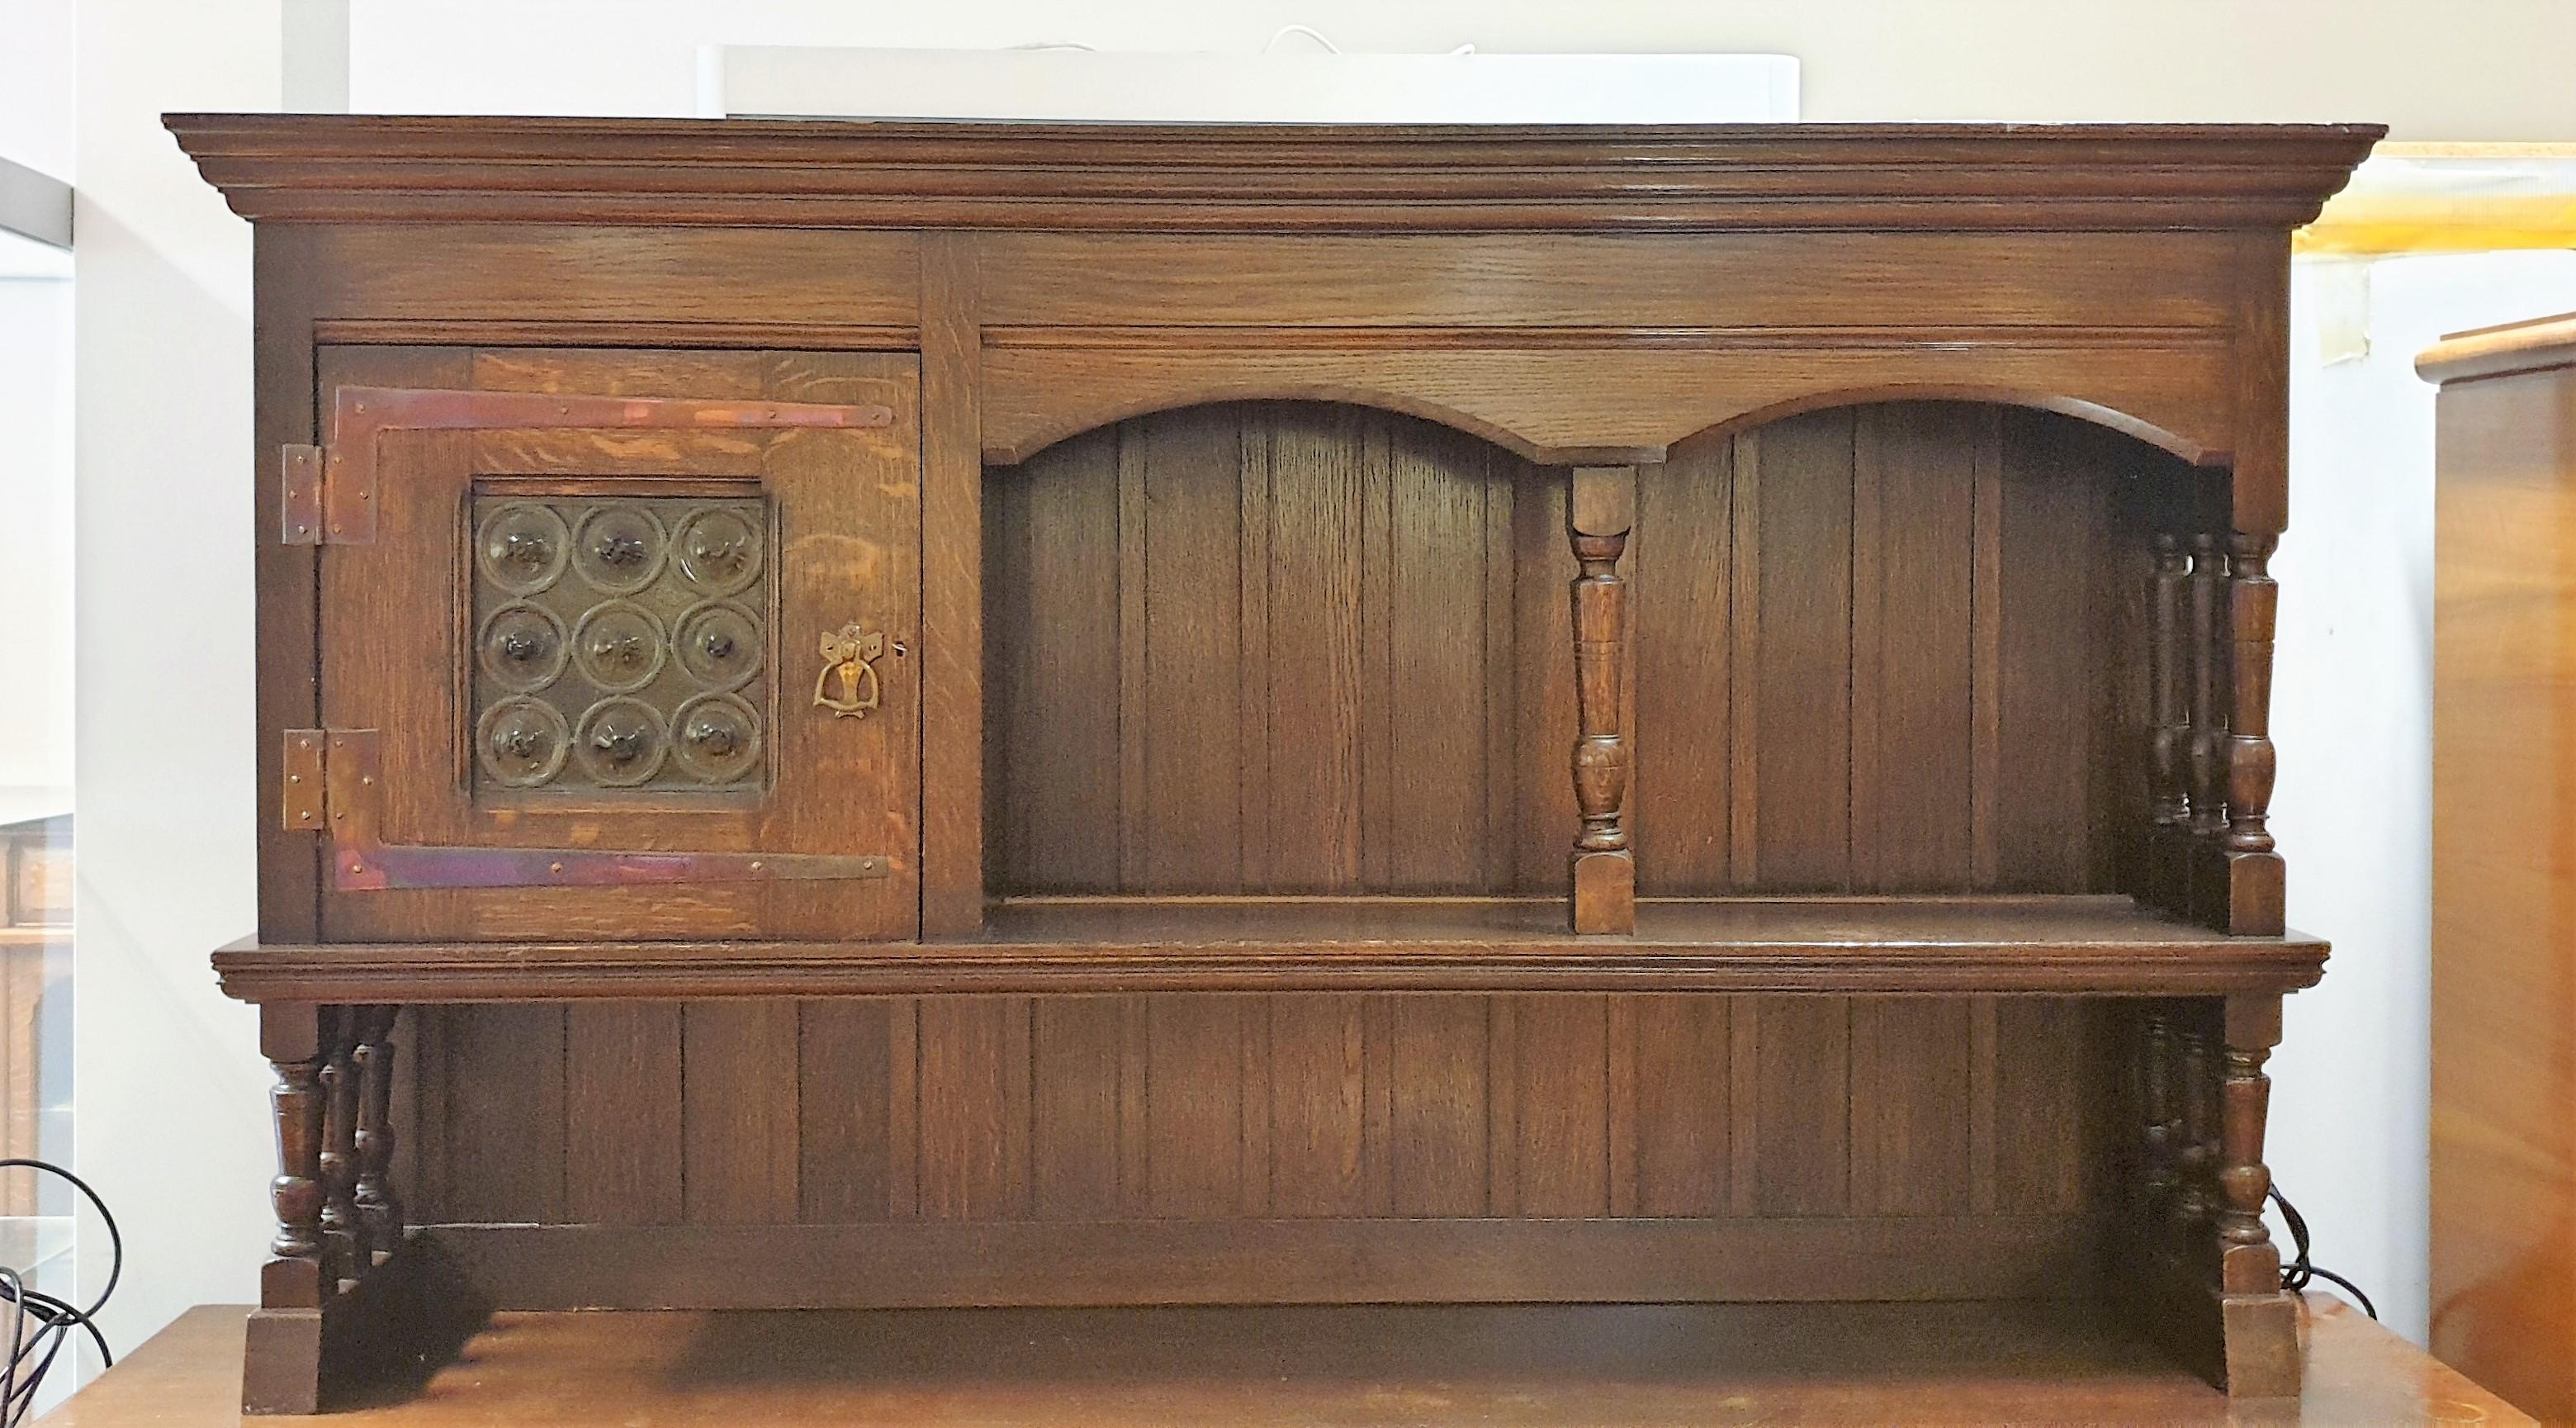 A fine Liberty & Co. ‘Lochleven’ Arts & Crafts oak sideboard, featuring leaded glass to upper cupboard door and metal strap work hinges

The ‘Lochleven’ sideboard first appeared the Liberty & Co., handbook of sketches, 1889 and remained popular